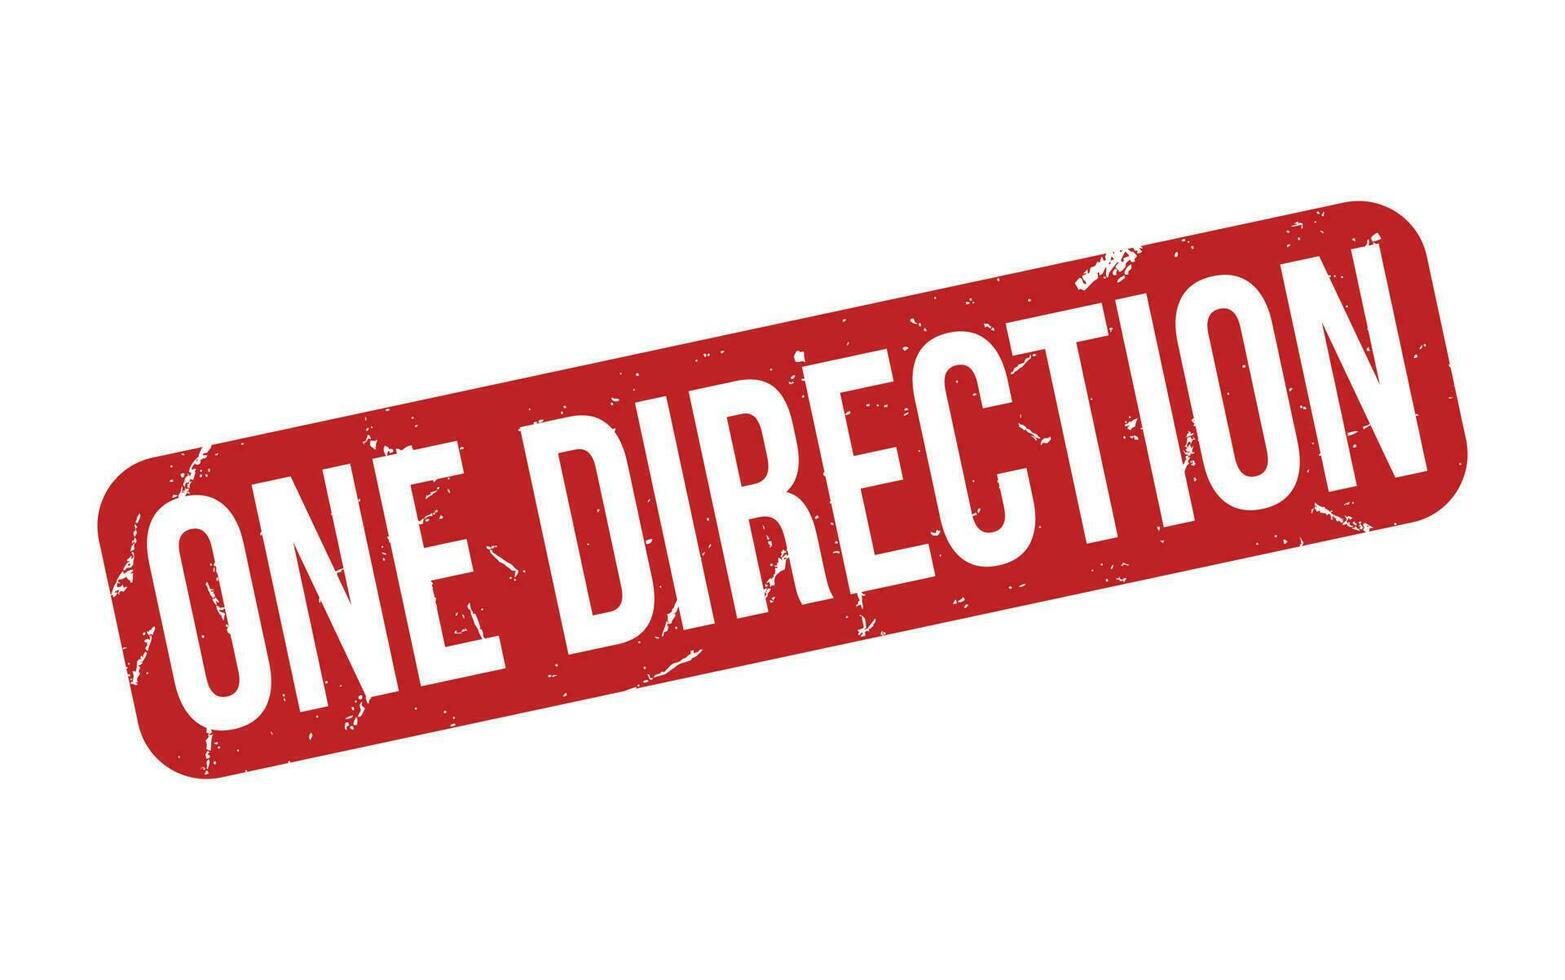 One Direction rubber grunge stamp seal vector